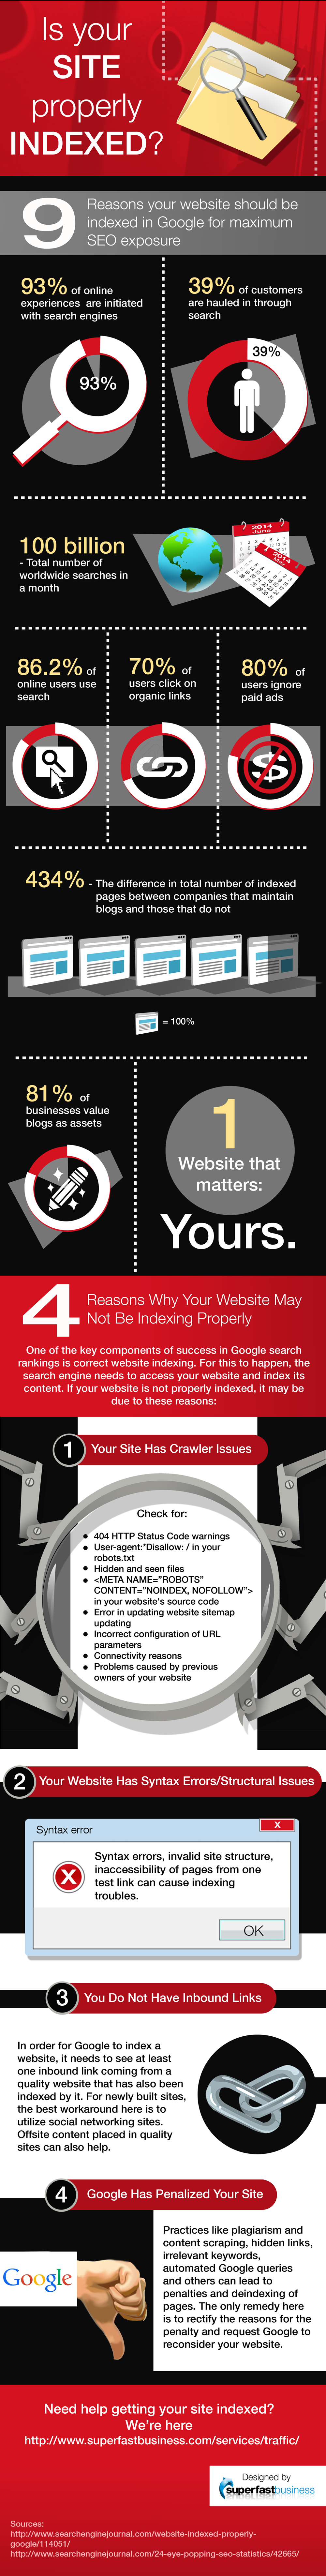 Is Your Site Properly Indexed?